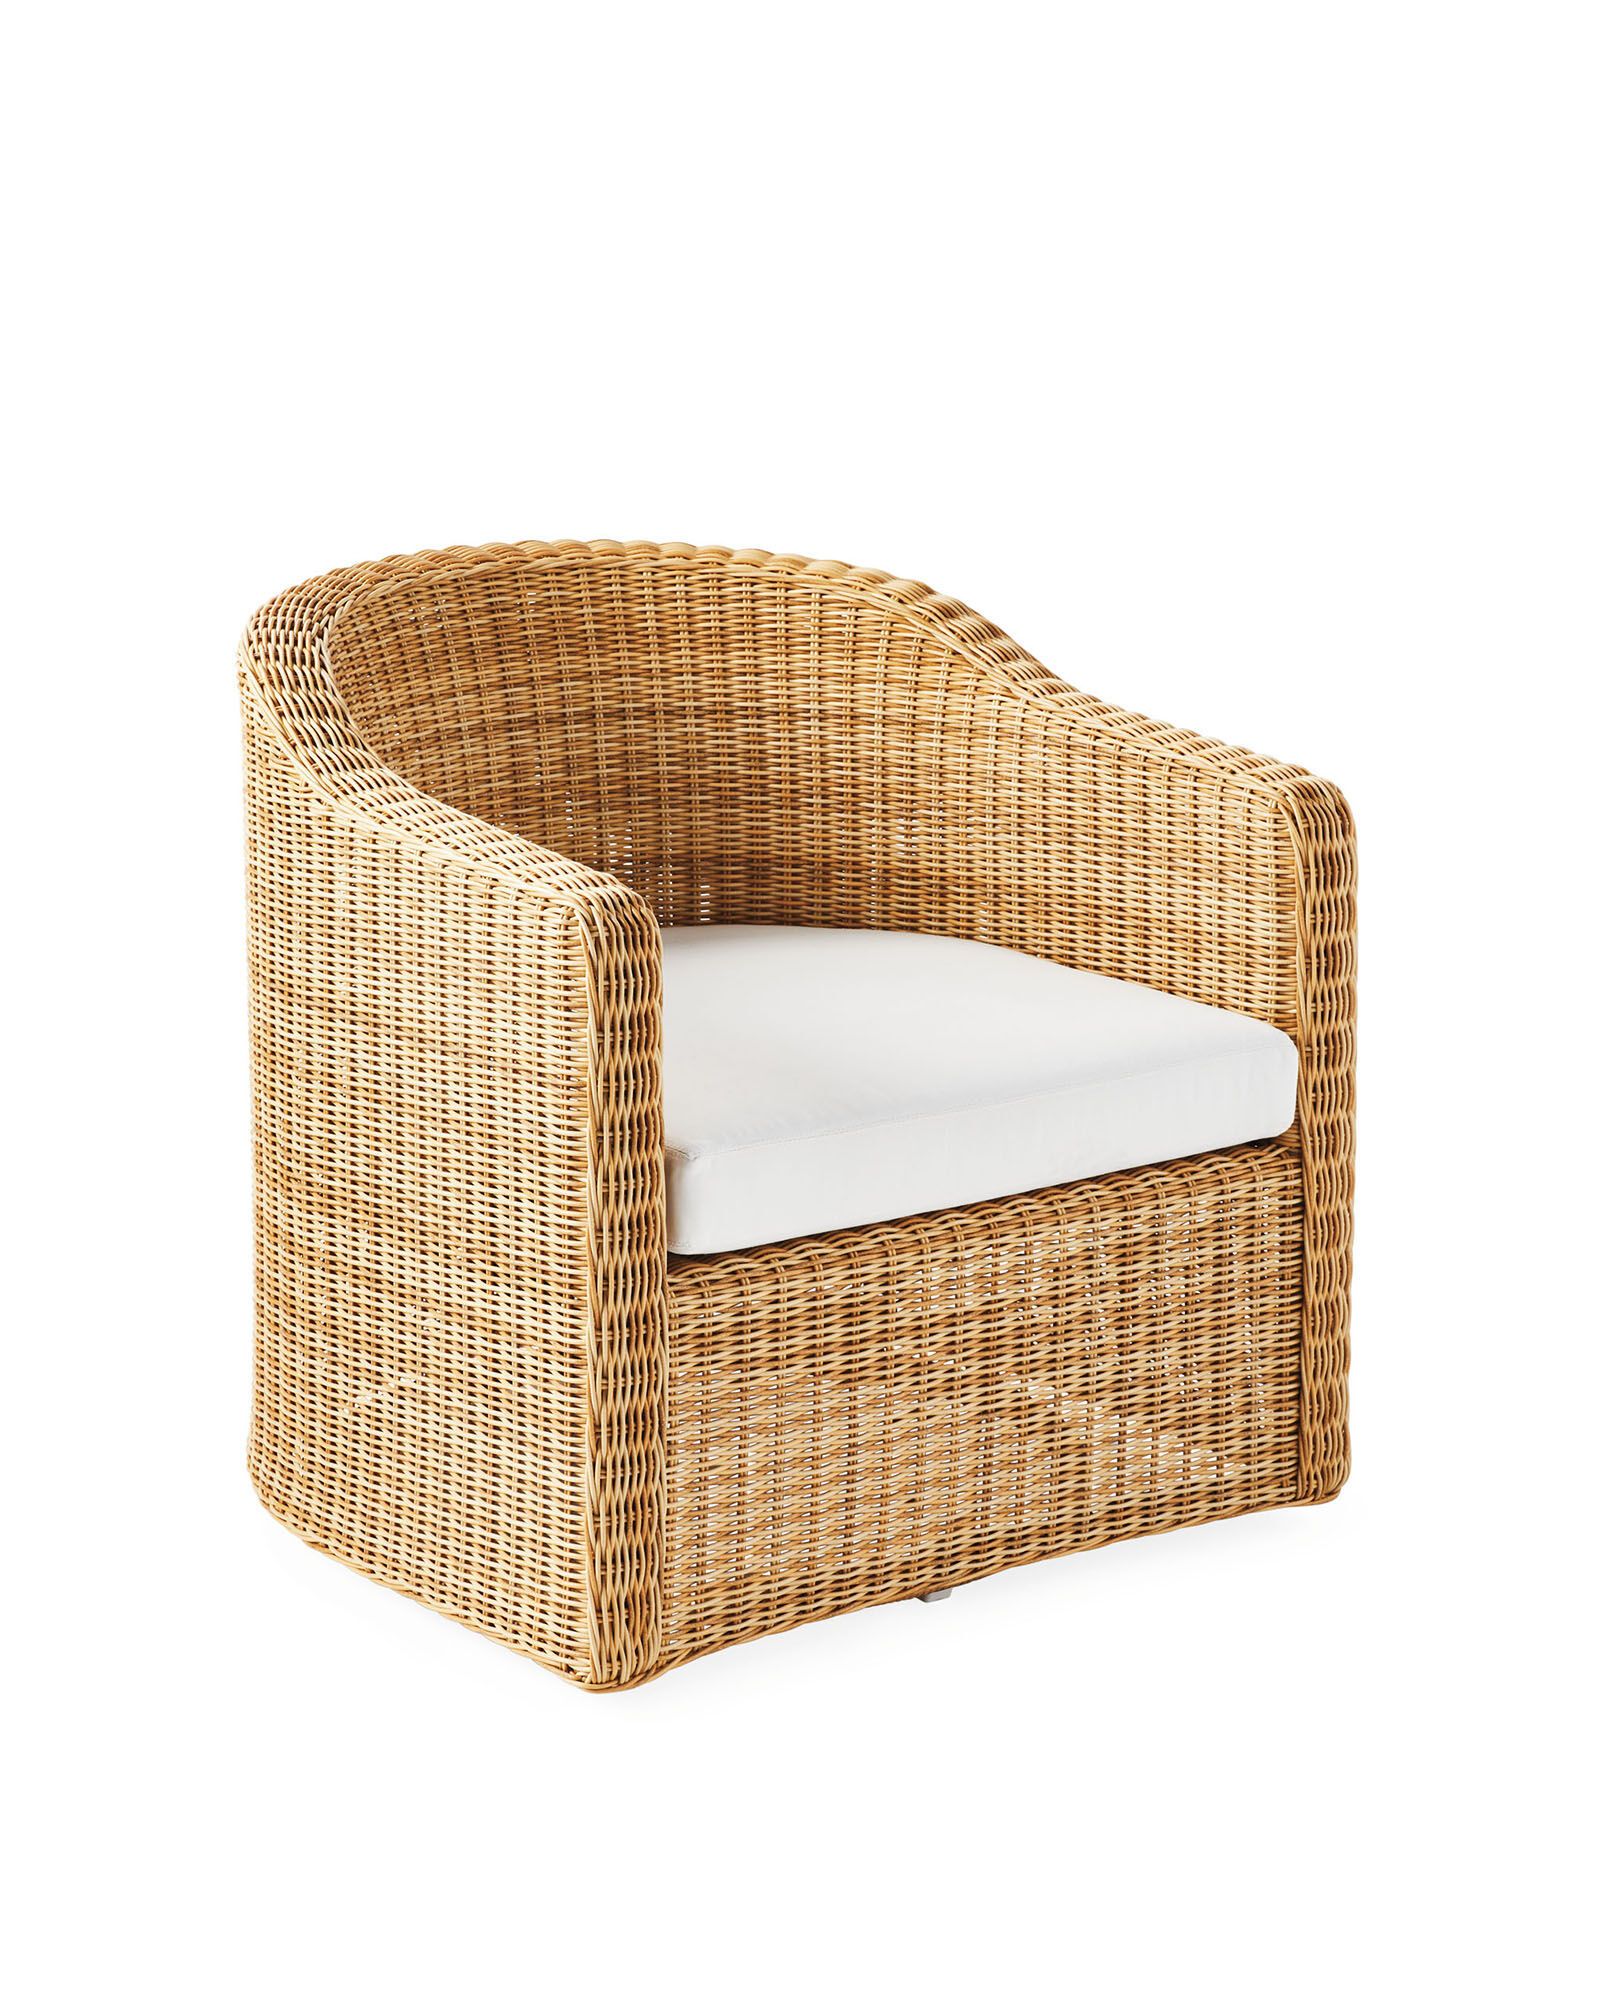 Tofino Swivel Chair | Serena and Lily